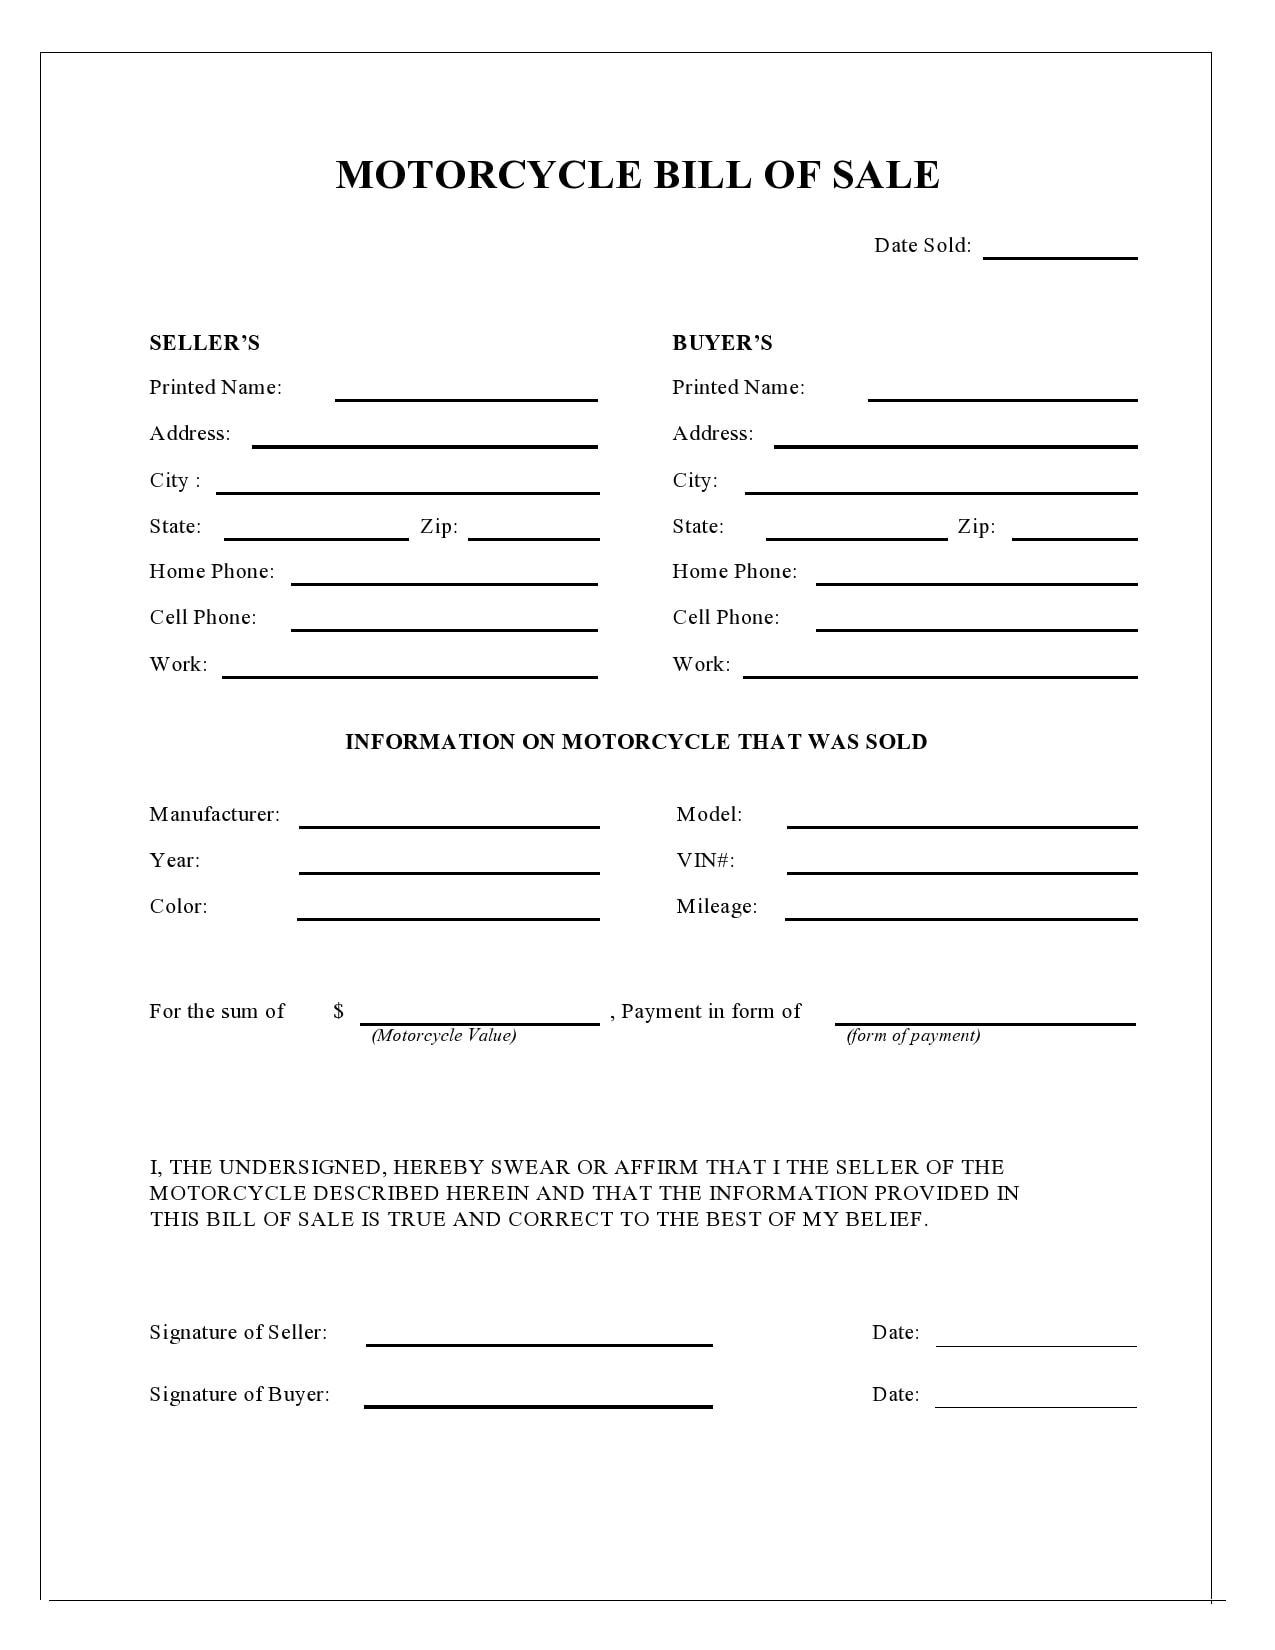 29 Printable Motorcycle Bill Of Sale Forms Free Templatearchive Generic motorcycle bill of sale